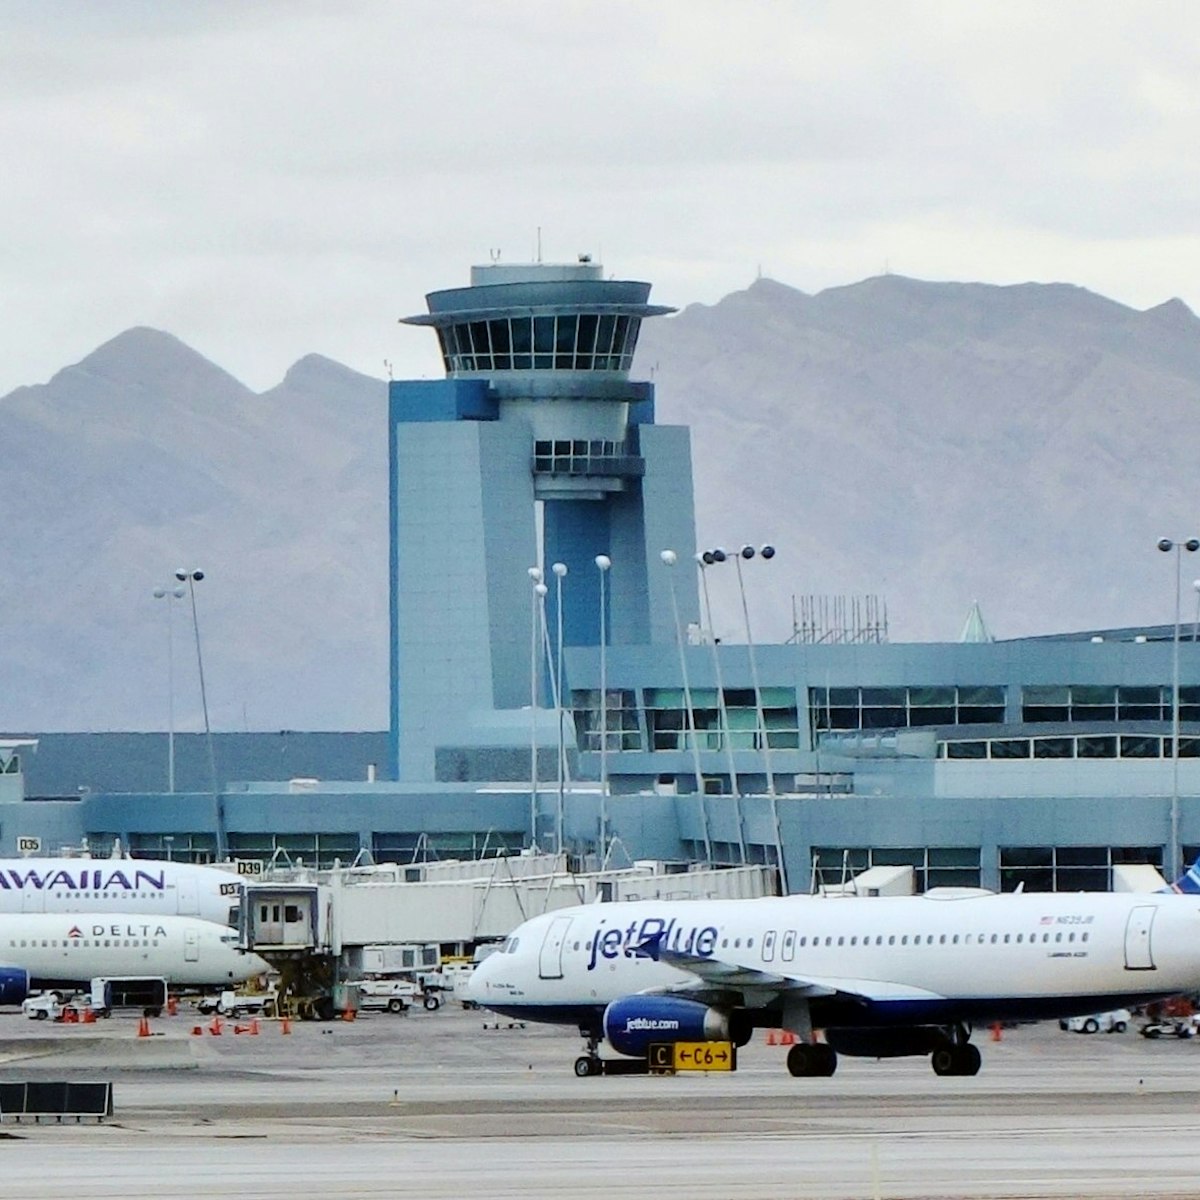 LAS VEGAS, NV -15 APRIL 2016- McCarran International Airport (LAS), located south of the Las Vegas strip, is the main airport in Nevada. There are slot machines in the airport.; Shutterstock ID 424698718; your: Bridget Brown; gl: 65050; netsuite: Online Editorial ; full: POI Image Update